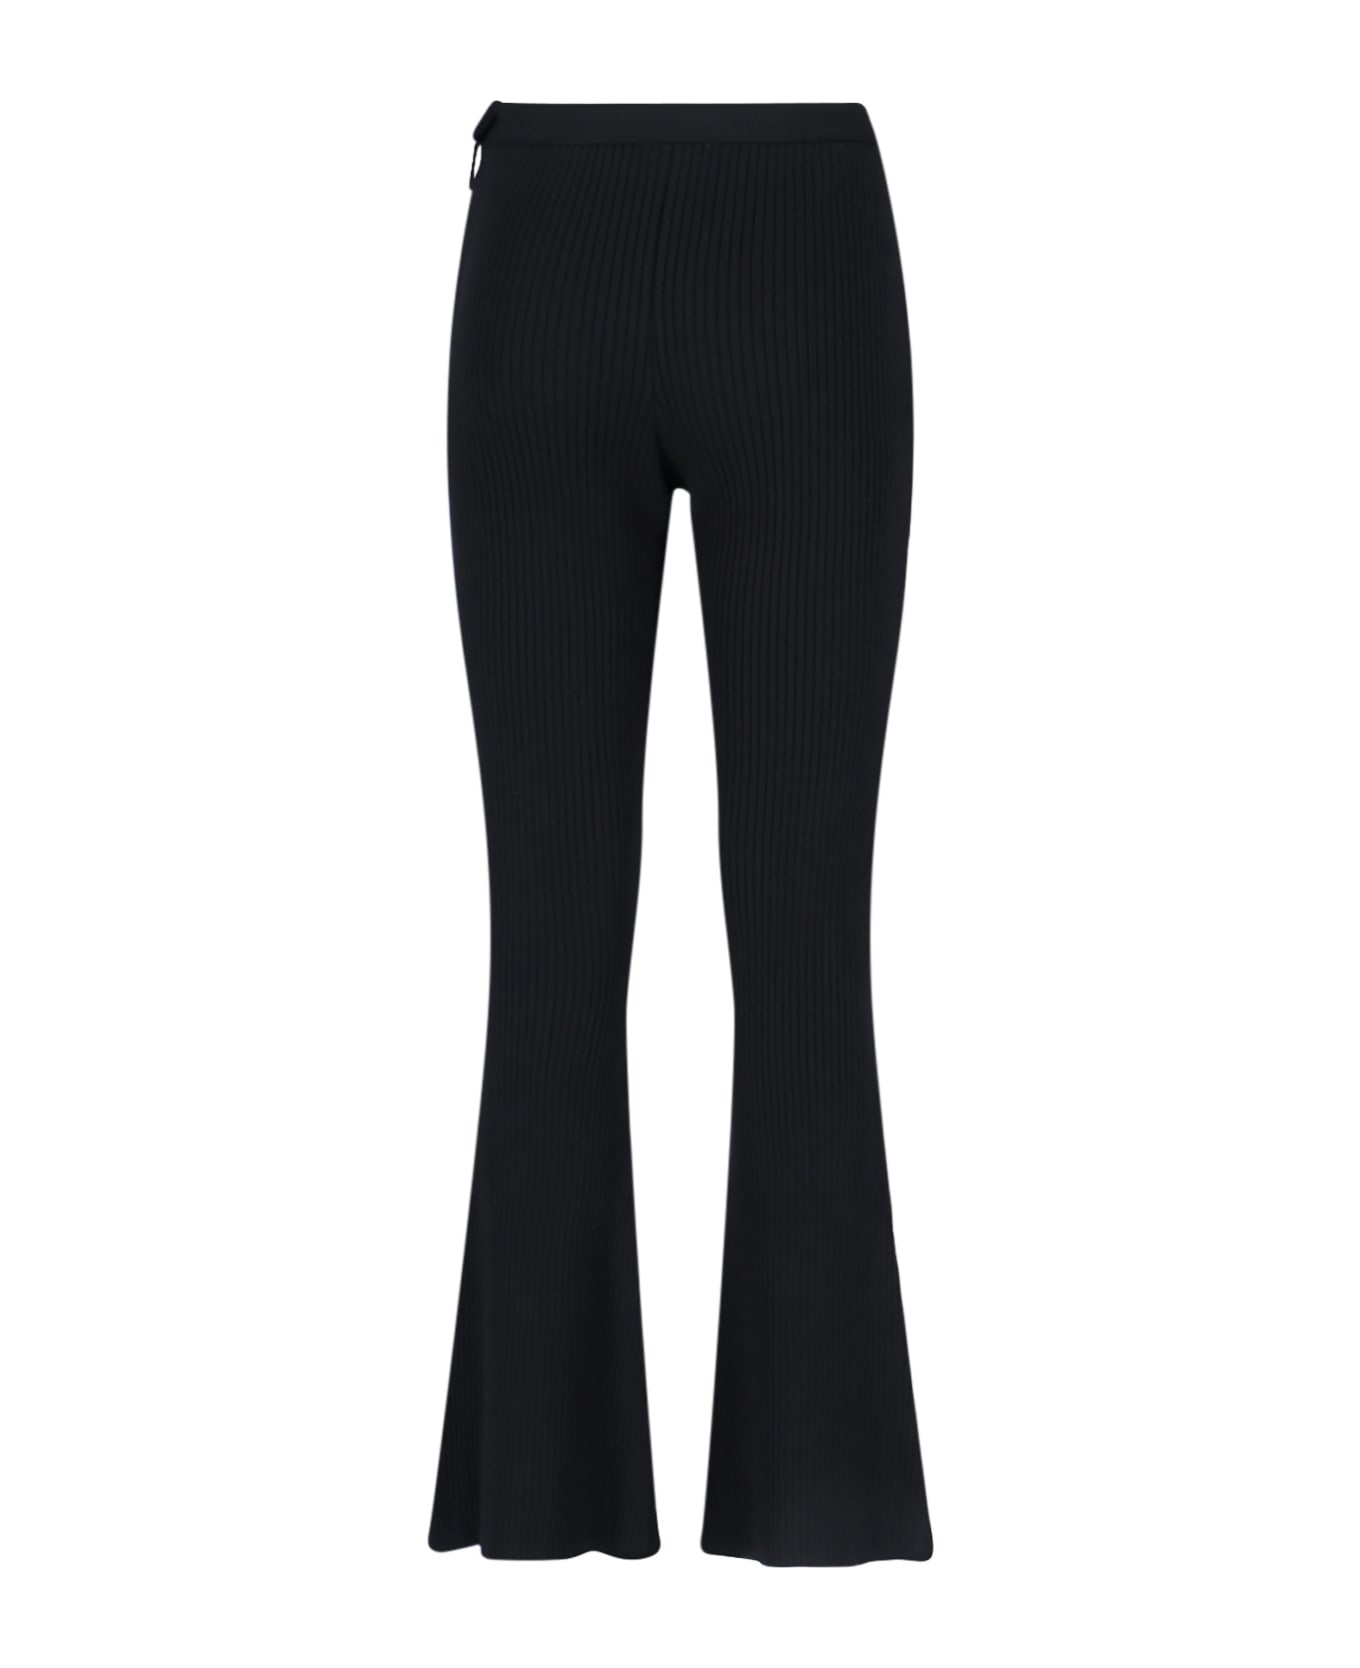 Courrèges Flared Pants - Black   ボトムス